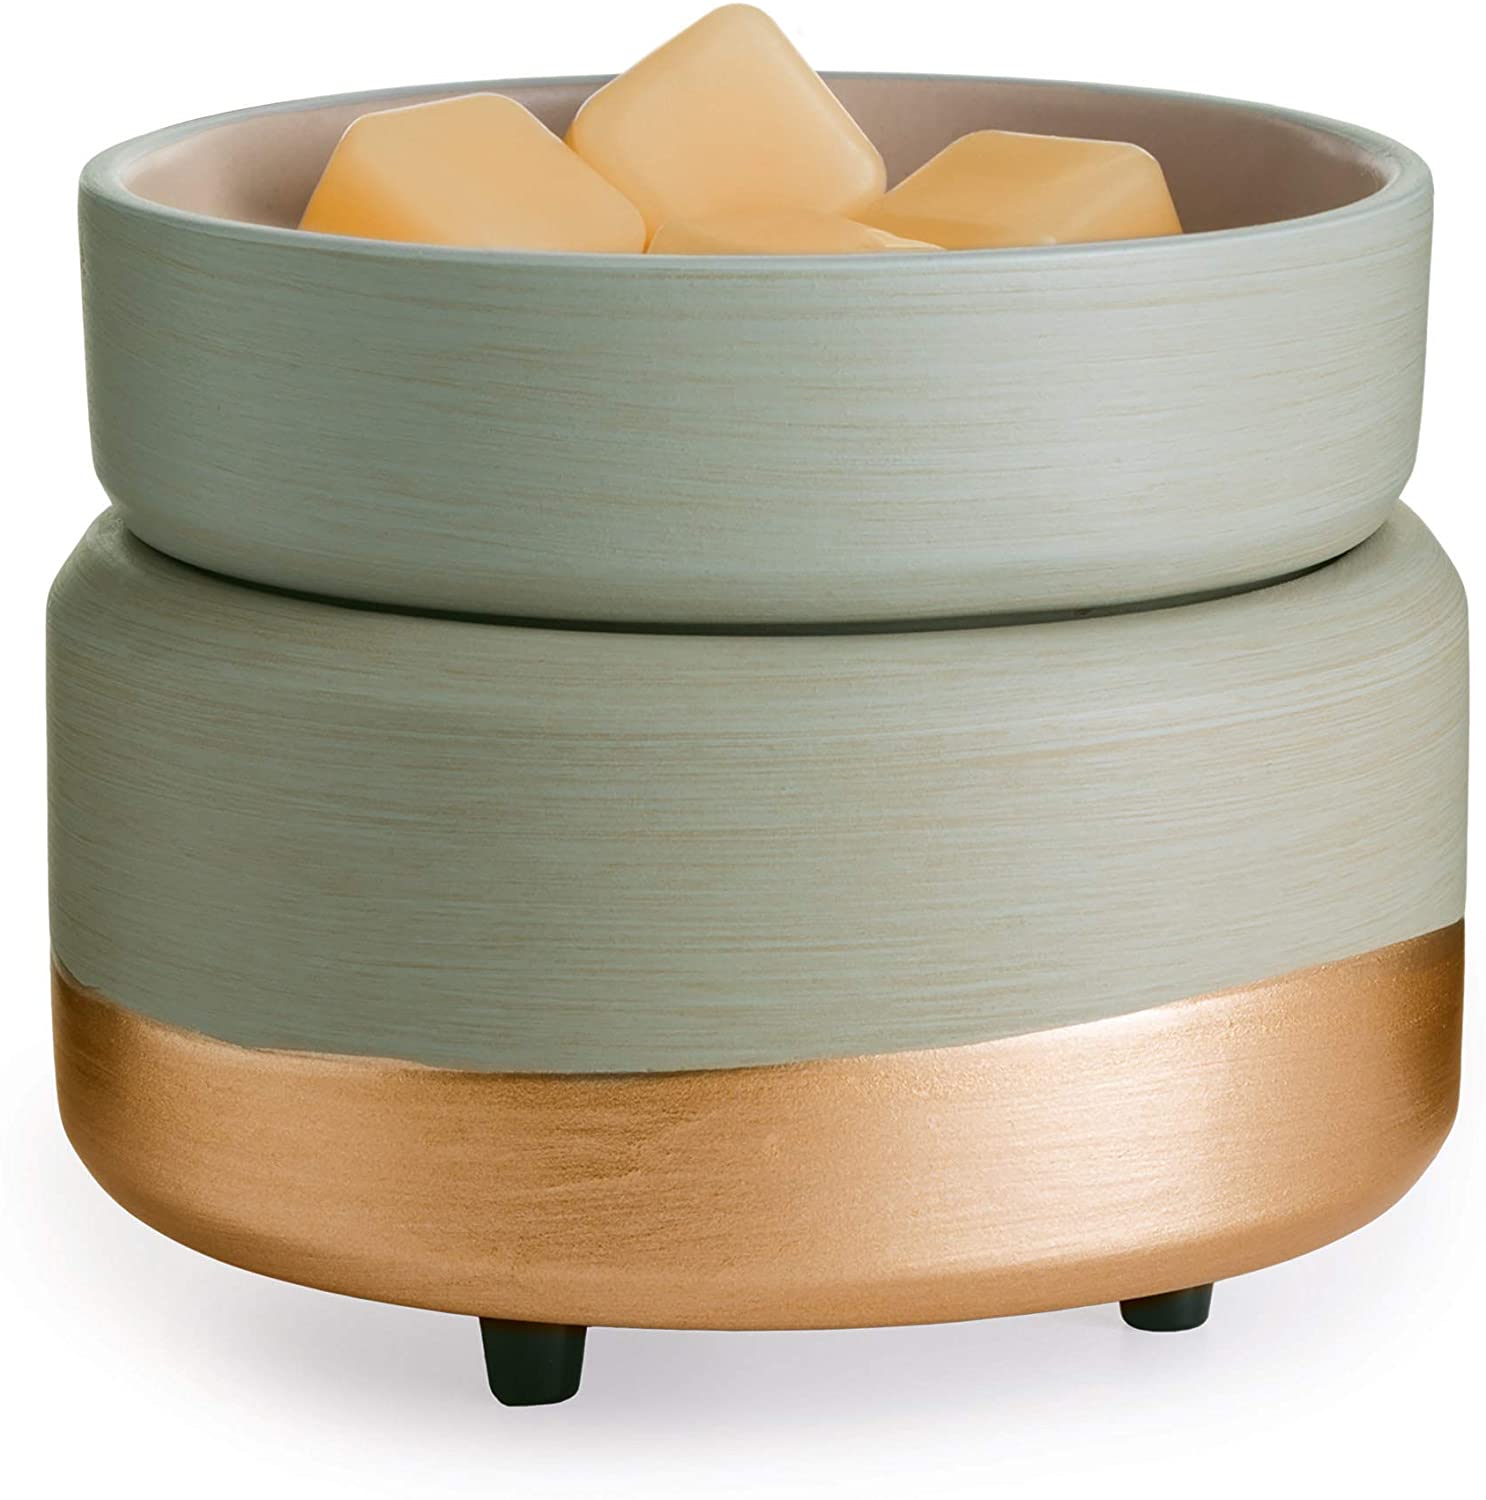 CANDLE WARMERS ETC, Midas 2-in-1 Fragrance Warmer for Warming Scented Candles or Wax Melts and Tarts with to Freshen Room